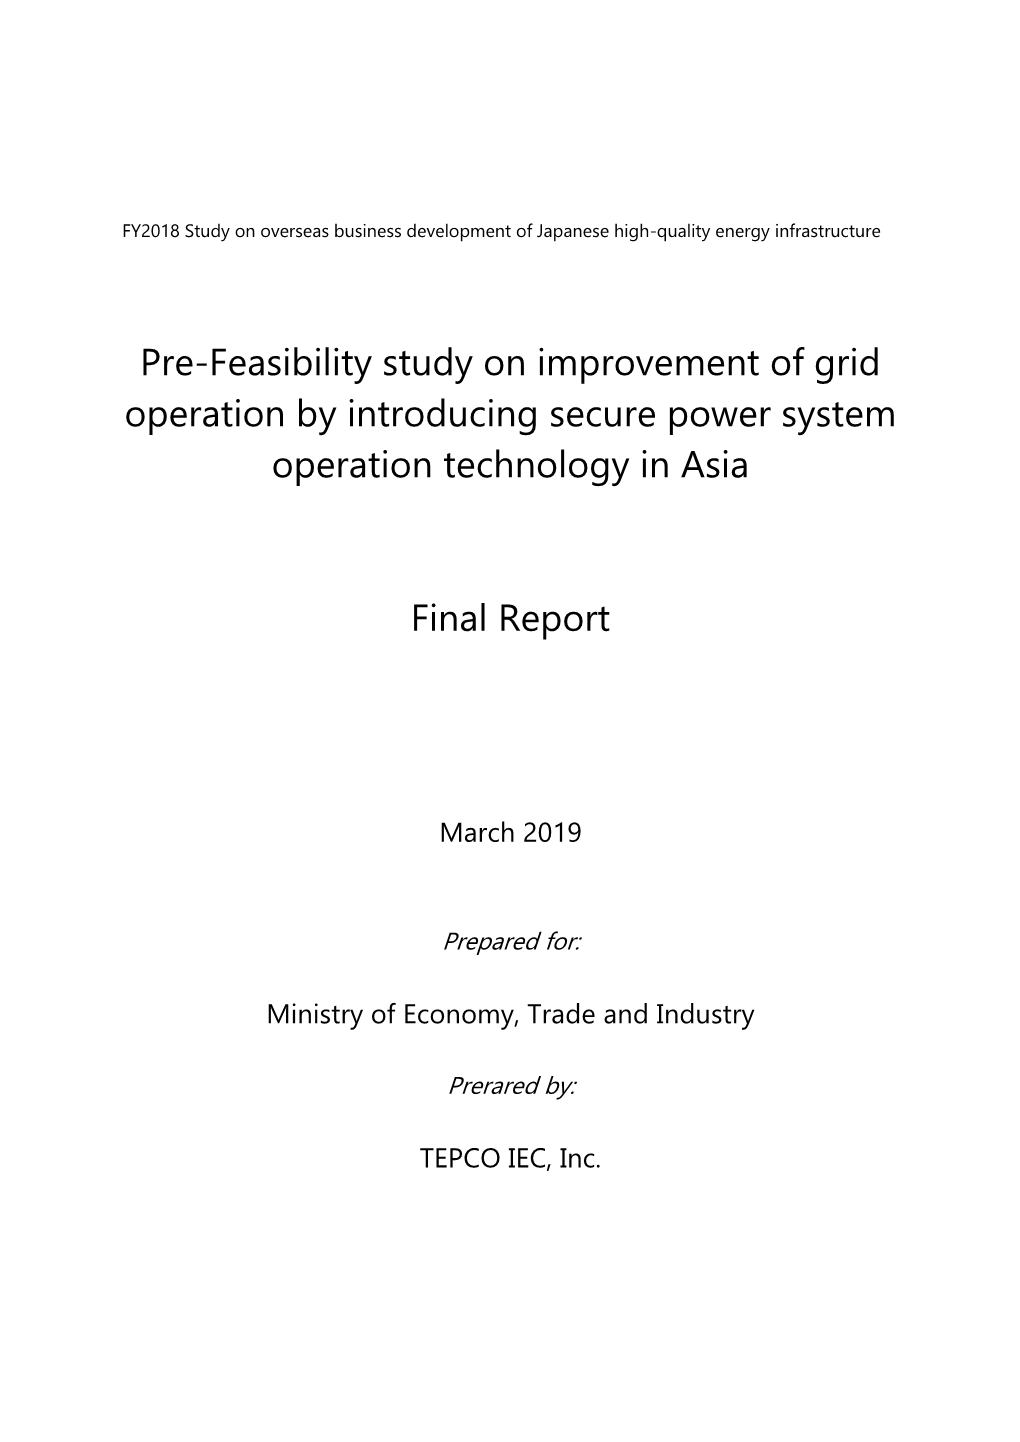 Pre-Feasibility Study on Improvement of Grid Operation by Introducing Secure Power System Operation Technology in Asia